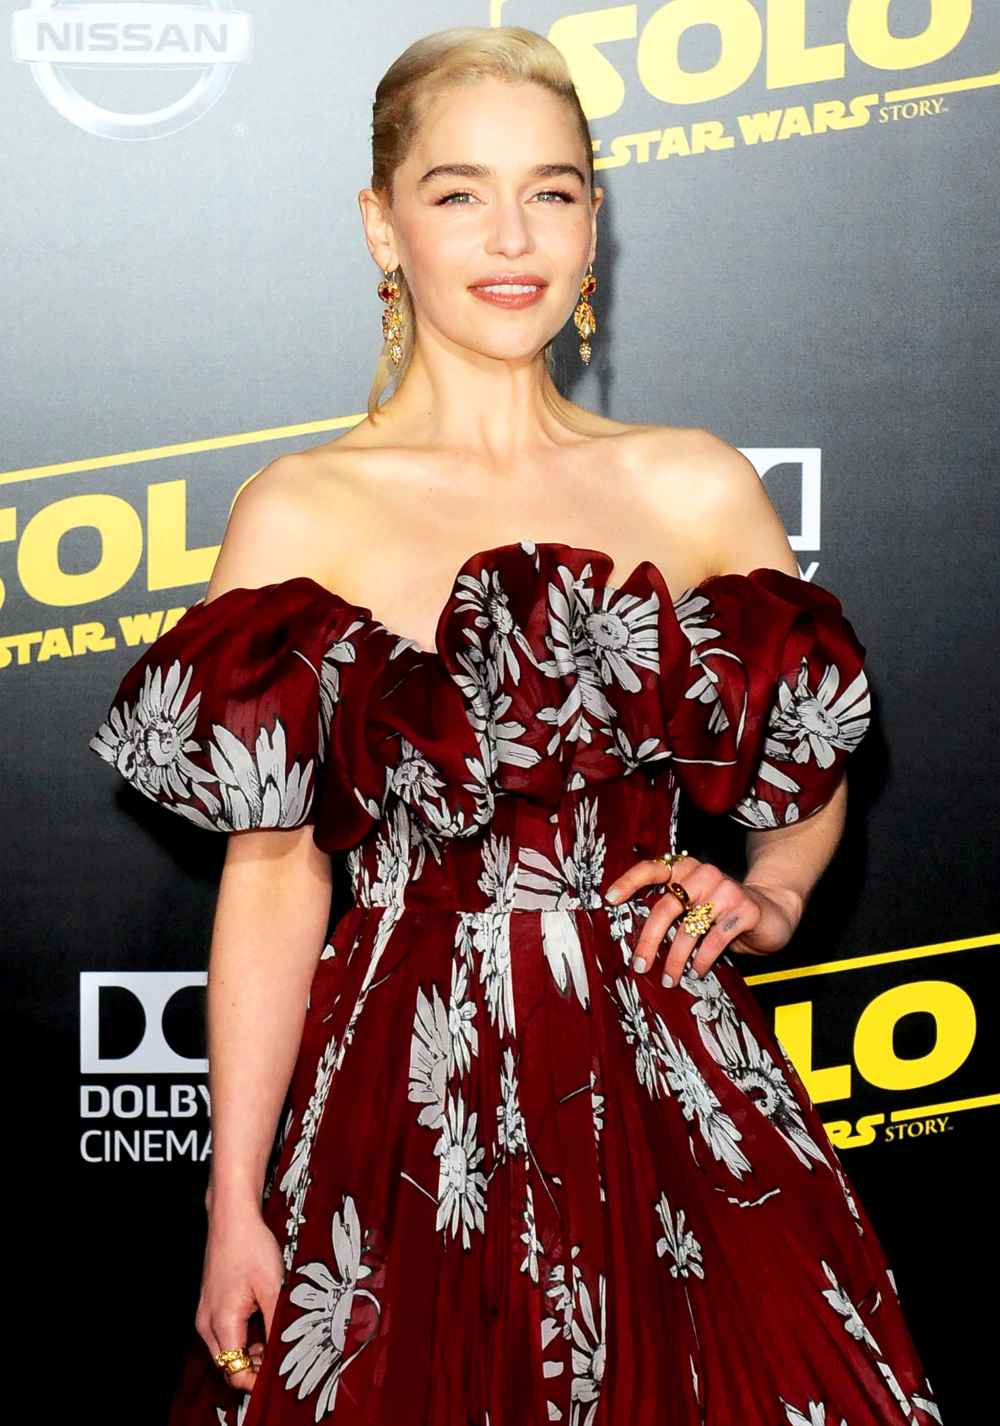 Emilia Clarke attends the premiere of ’Solo: A Star Wars Story' on May 10, 2018 in Los Angeles, California.